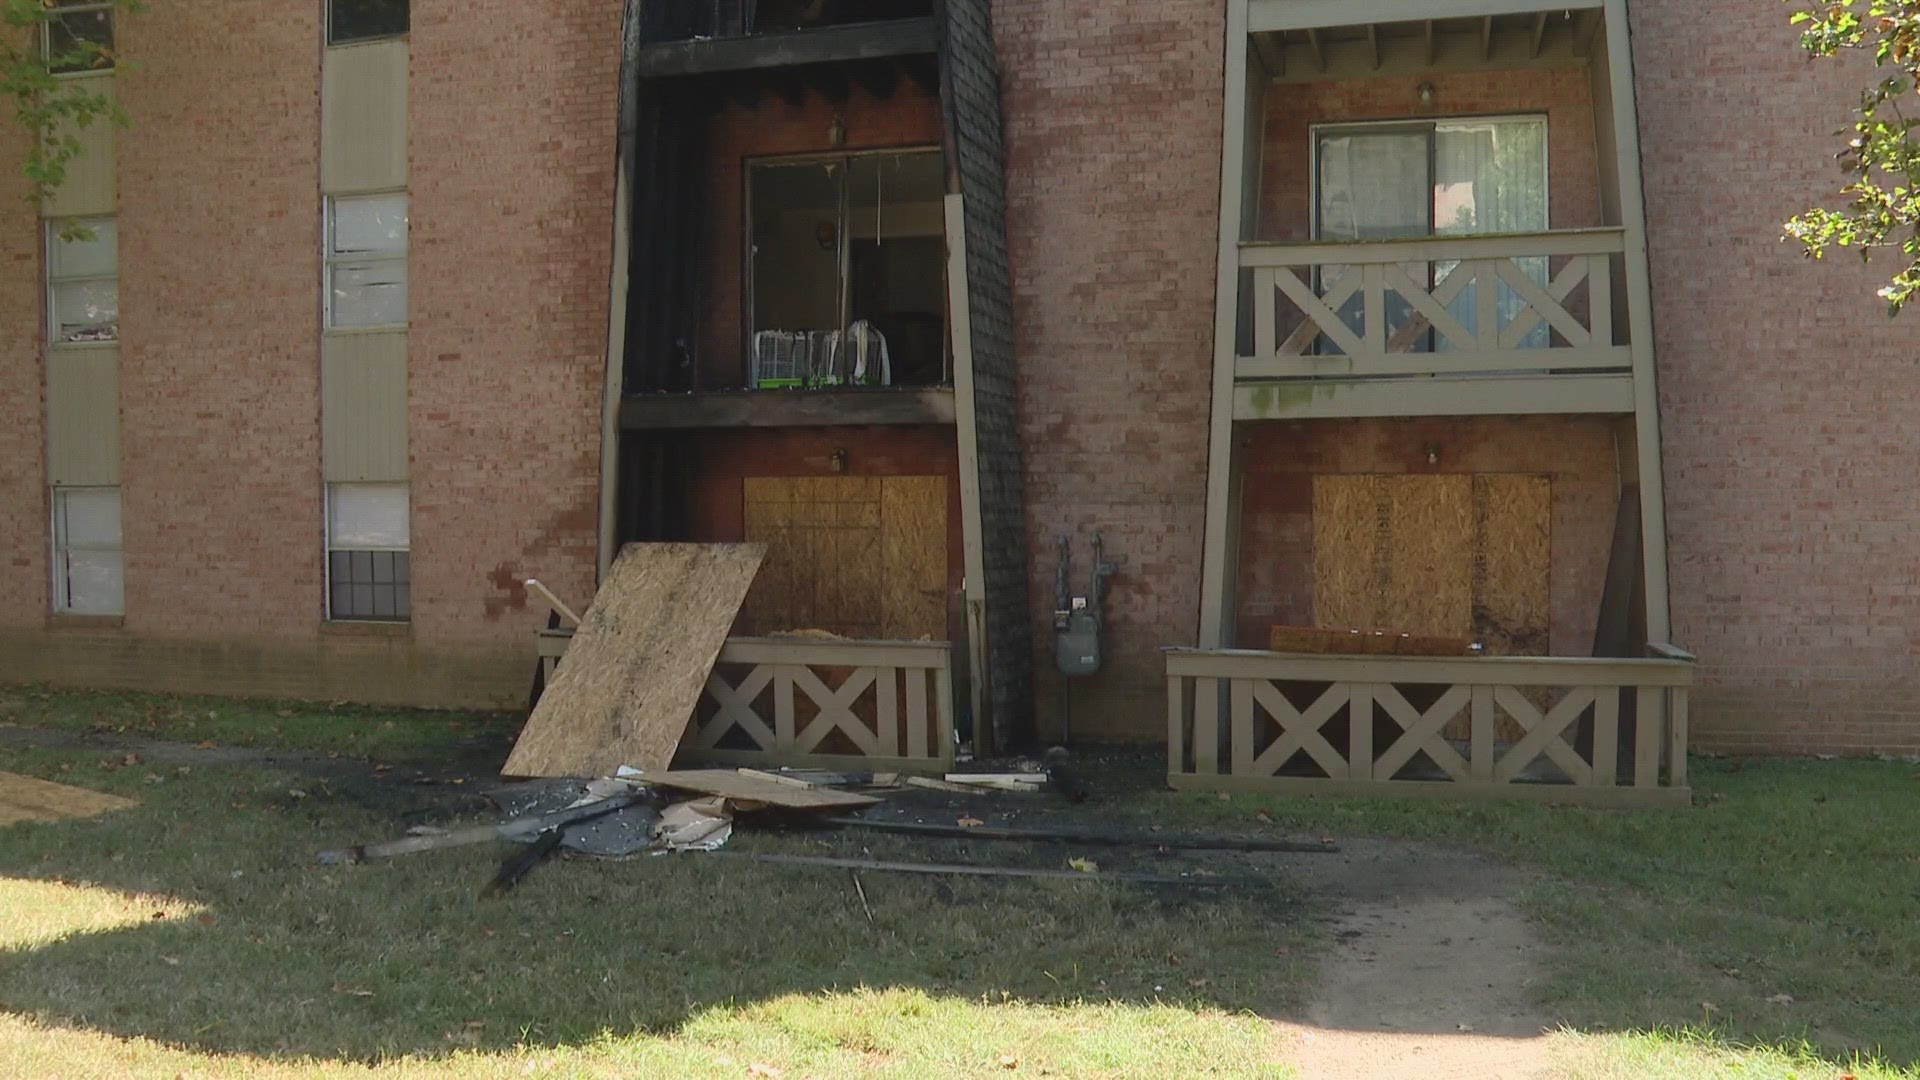 Neighbors spoke to WHAS11 News after a fire at the Hames Trace apartments early Saturday.